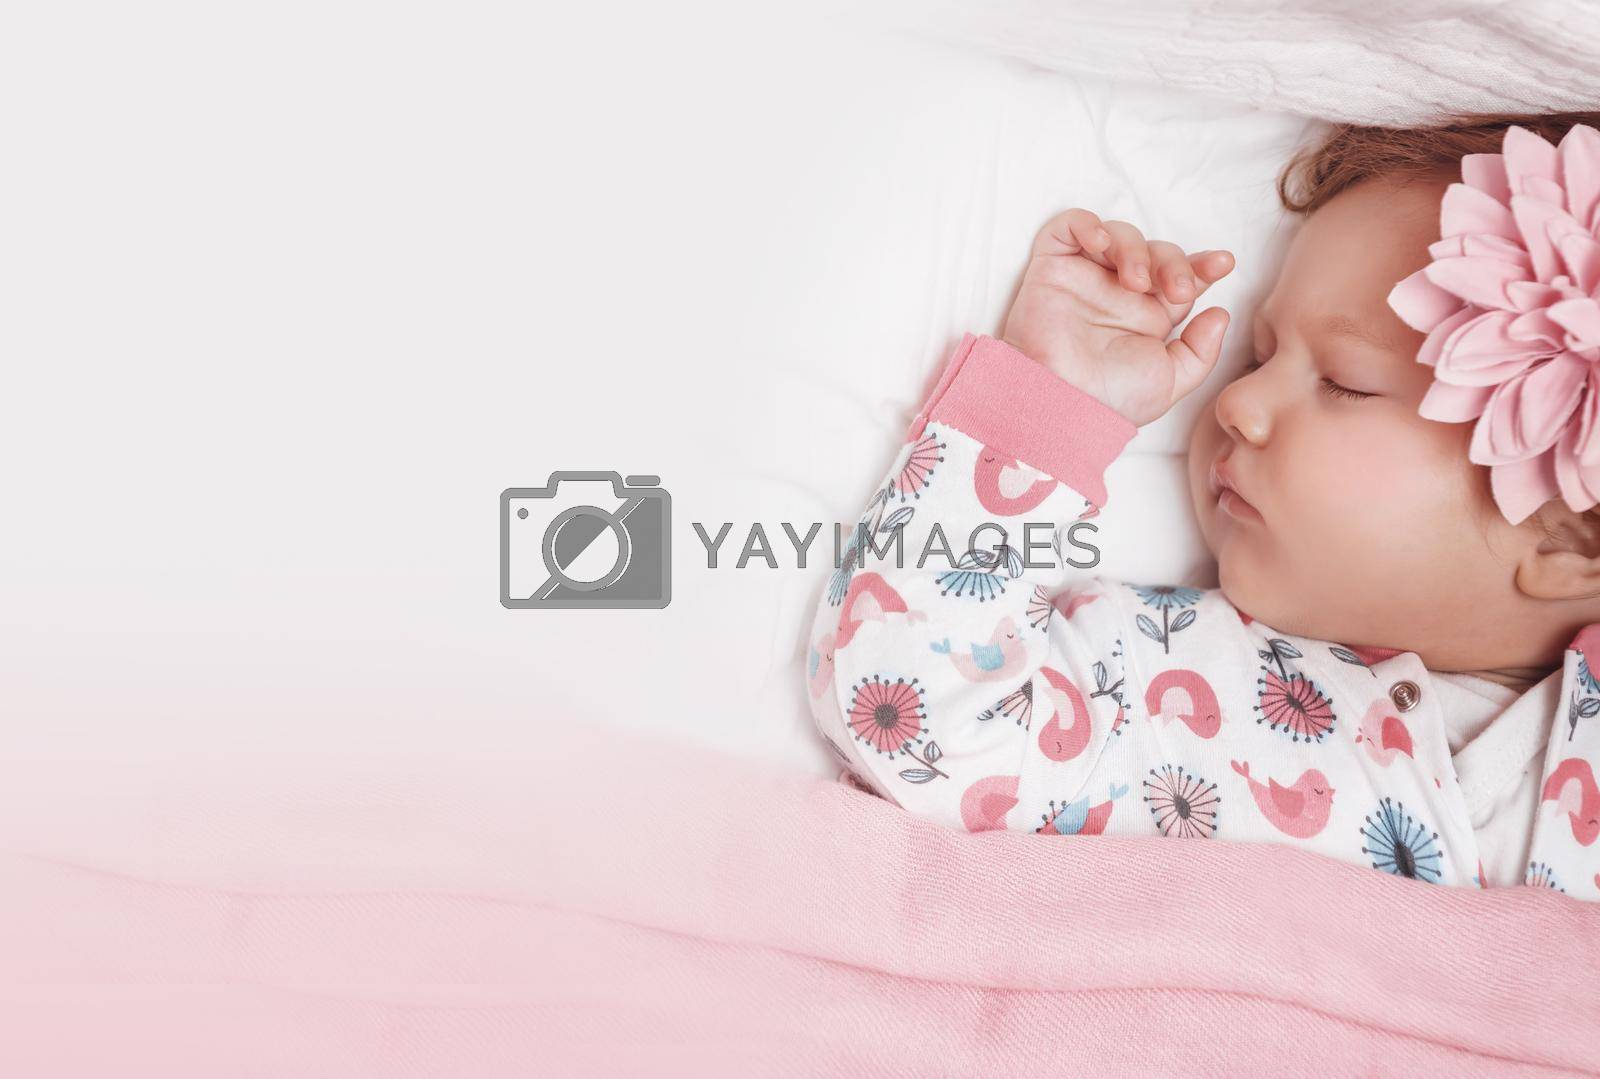 Portrait of an Adorable Baby Girl With Cute Pink Flower Hairpin Peacefully Sleeping in the Crib at Home. Photo with Copy Space. Healthy Babies Life Concept.